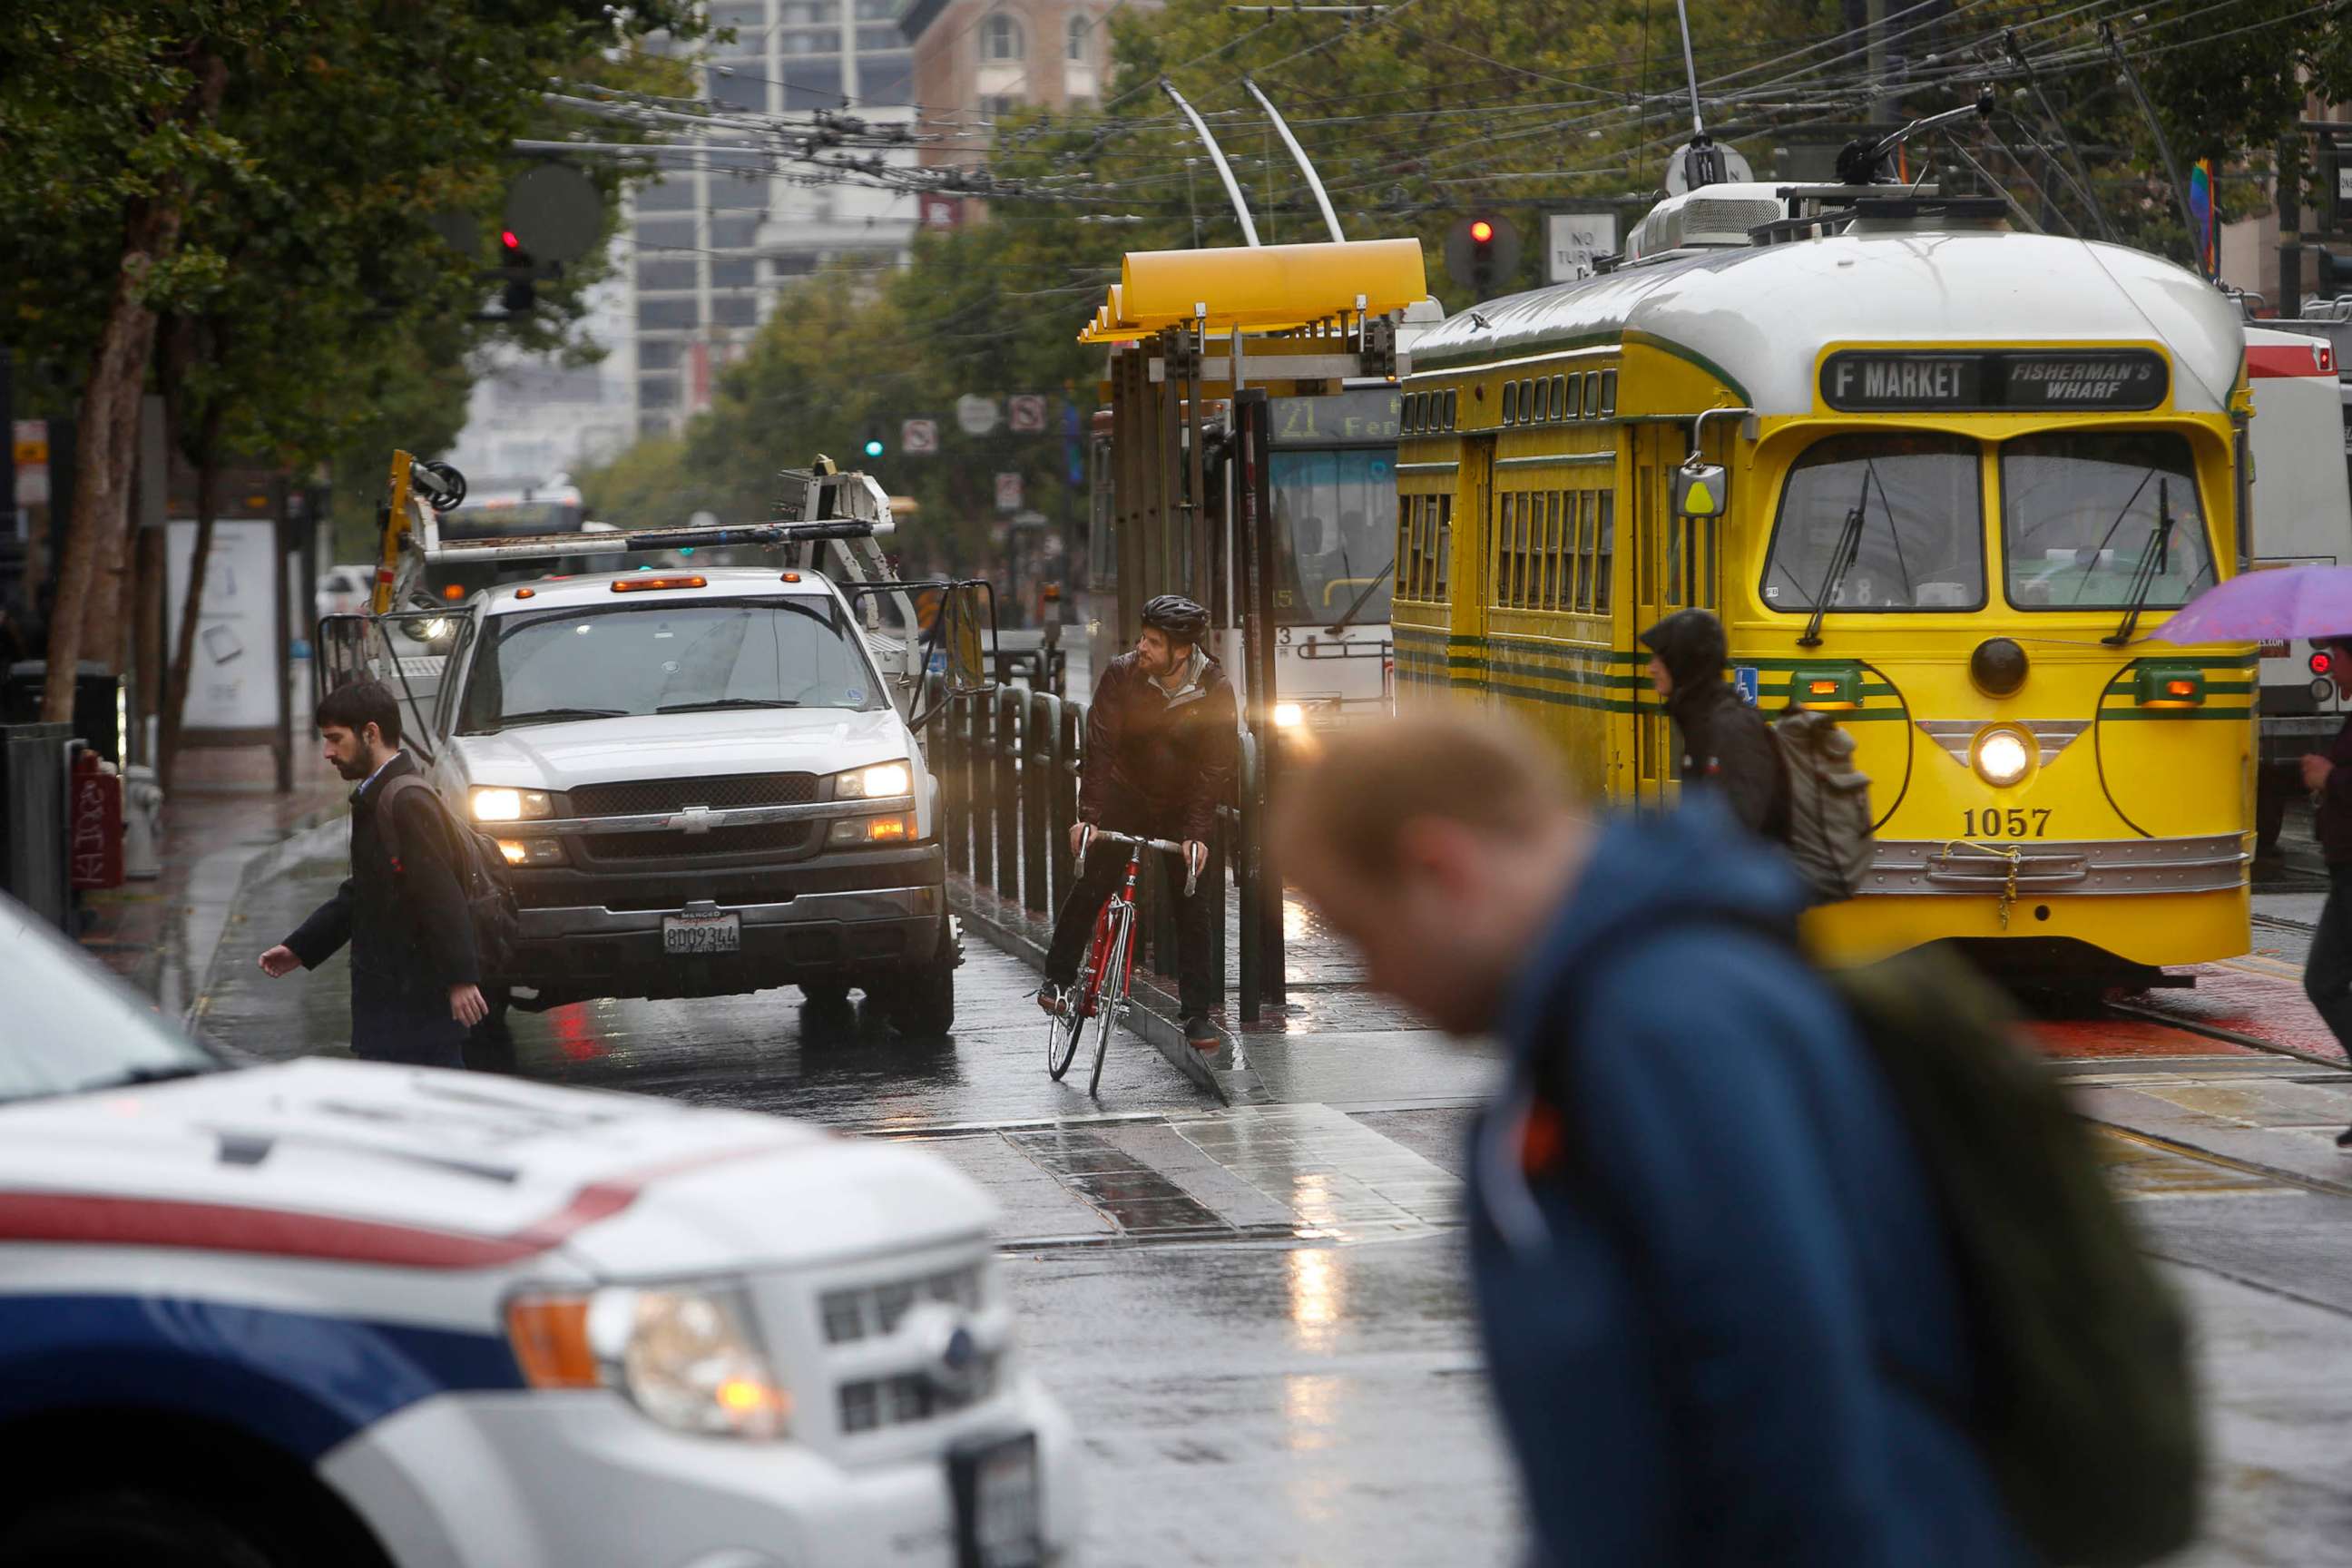 PHOTO: A bicyclists waits at a traffic light surrounded by cars, buses, and pedestrians during the morning commute on Market Street in San Francisco, June 10, 2015.